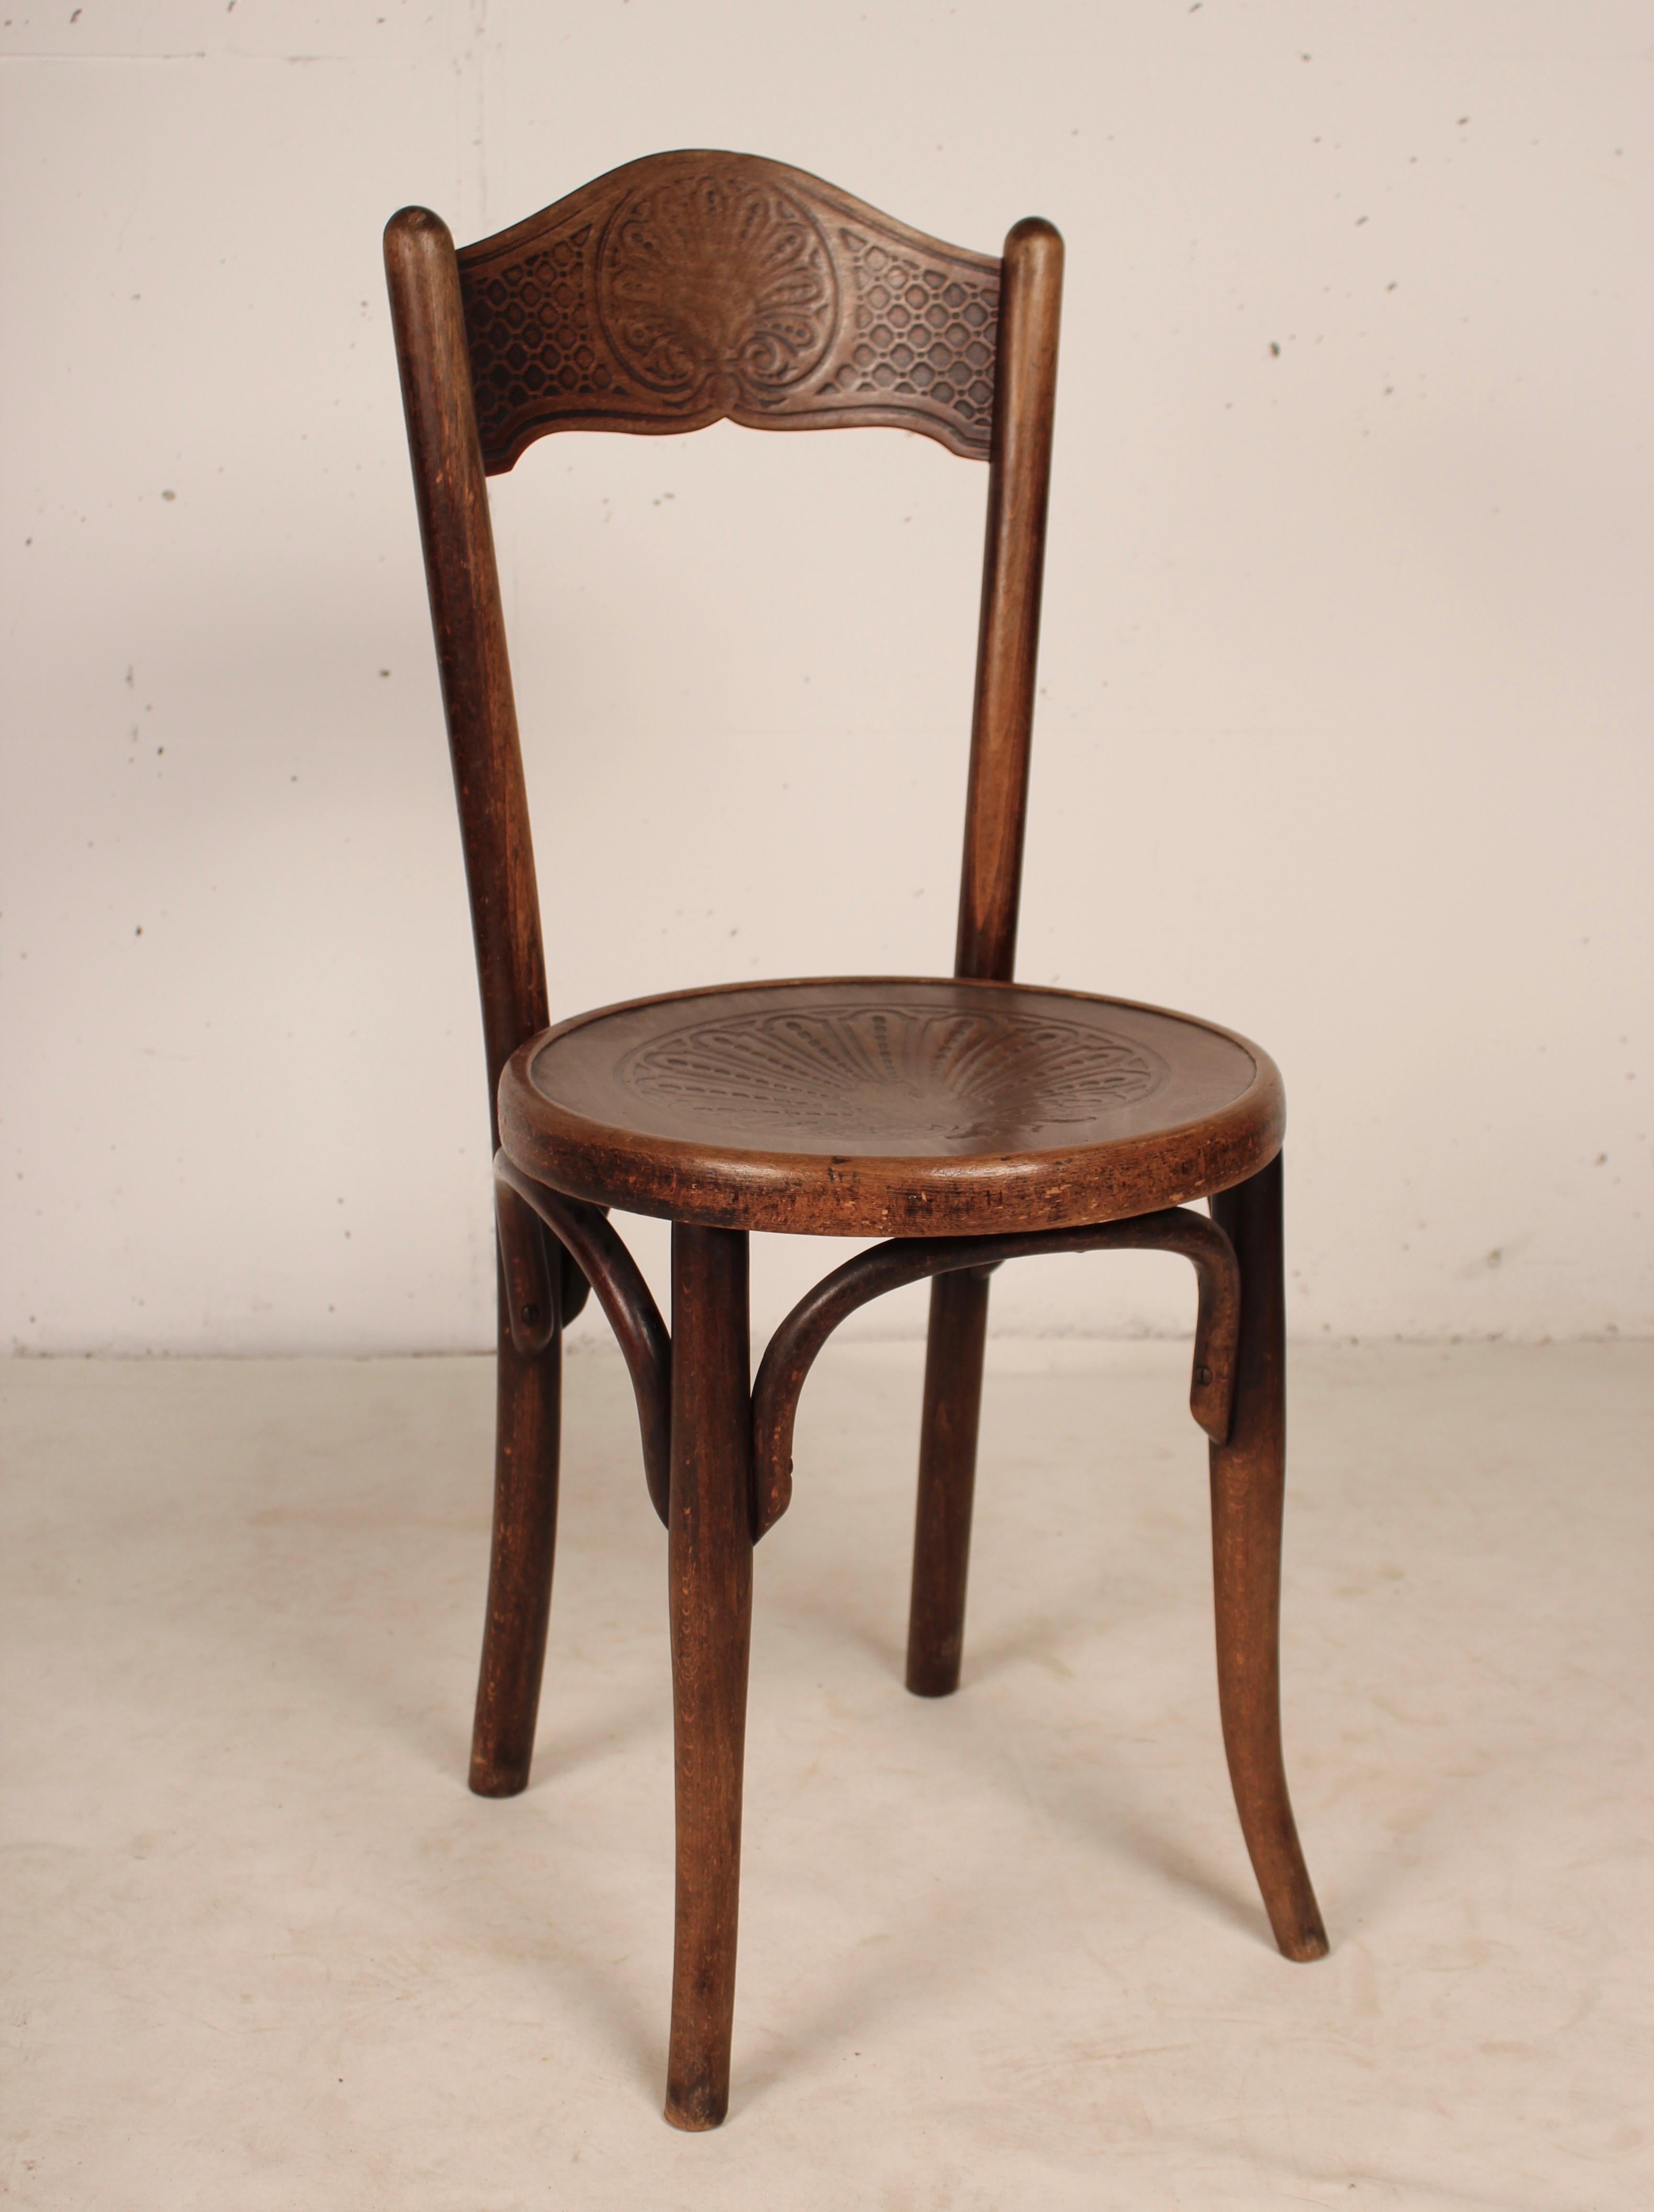 Set of 6 Bistro Chairs by Jacob & Josef Kohn, 1890 Austro-Hungarian Empire For Sale 10